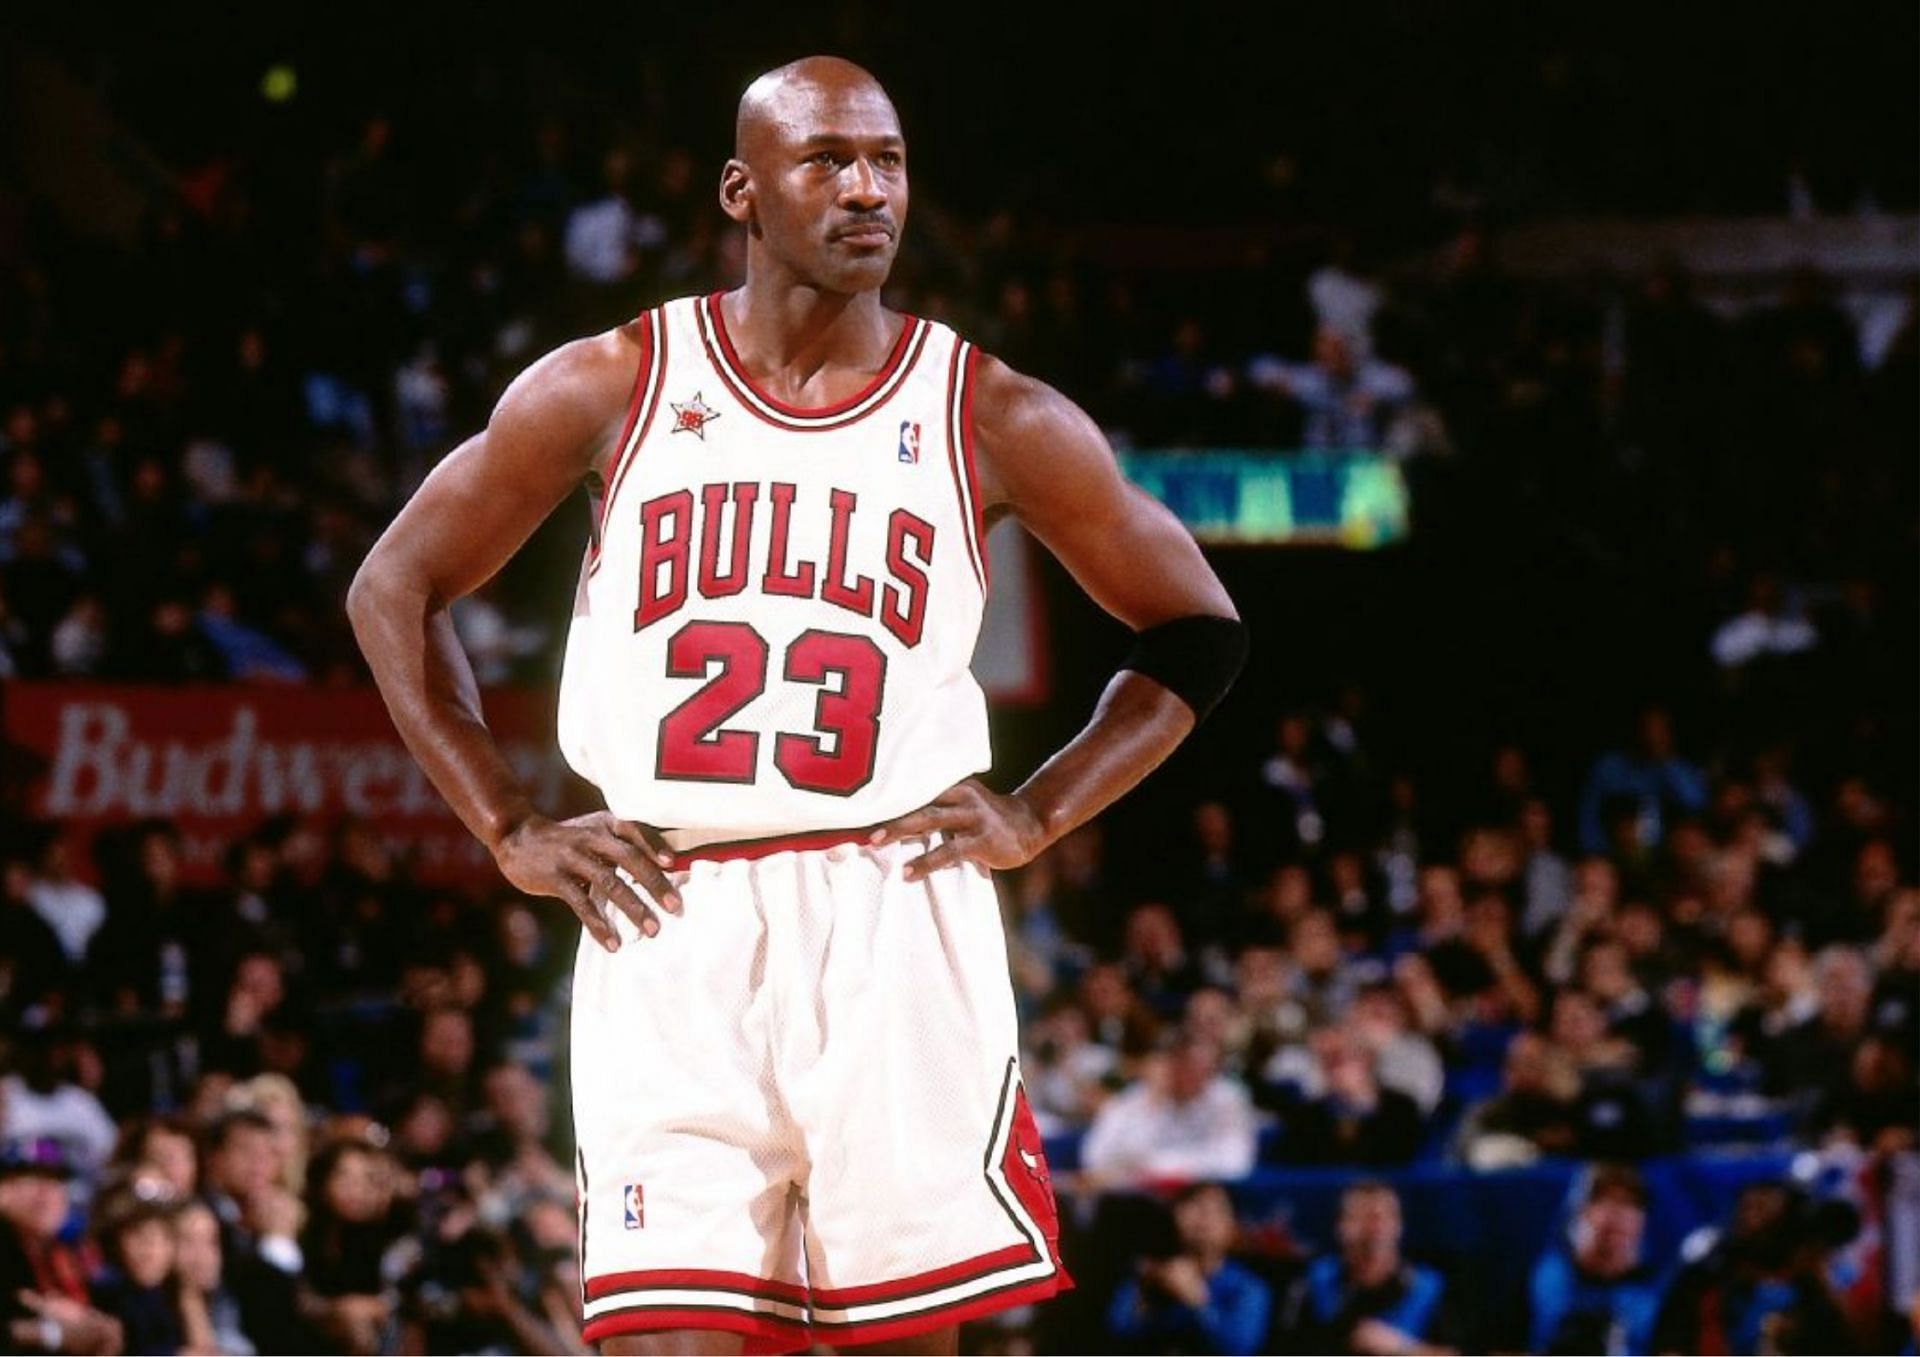 Michael Jordan was swept twice in his career in the playoffs, both by Larry Bird